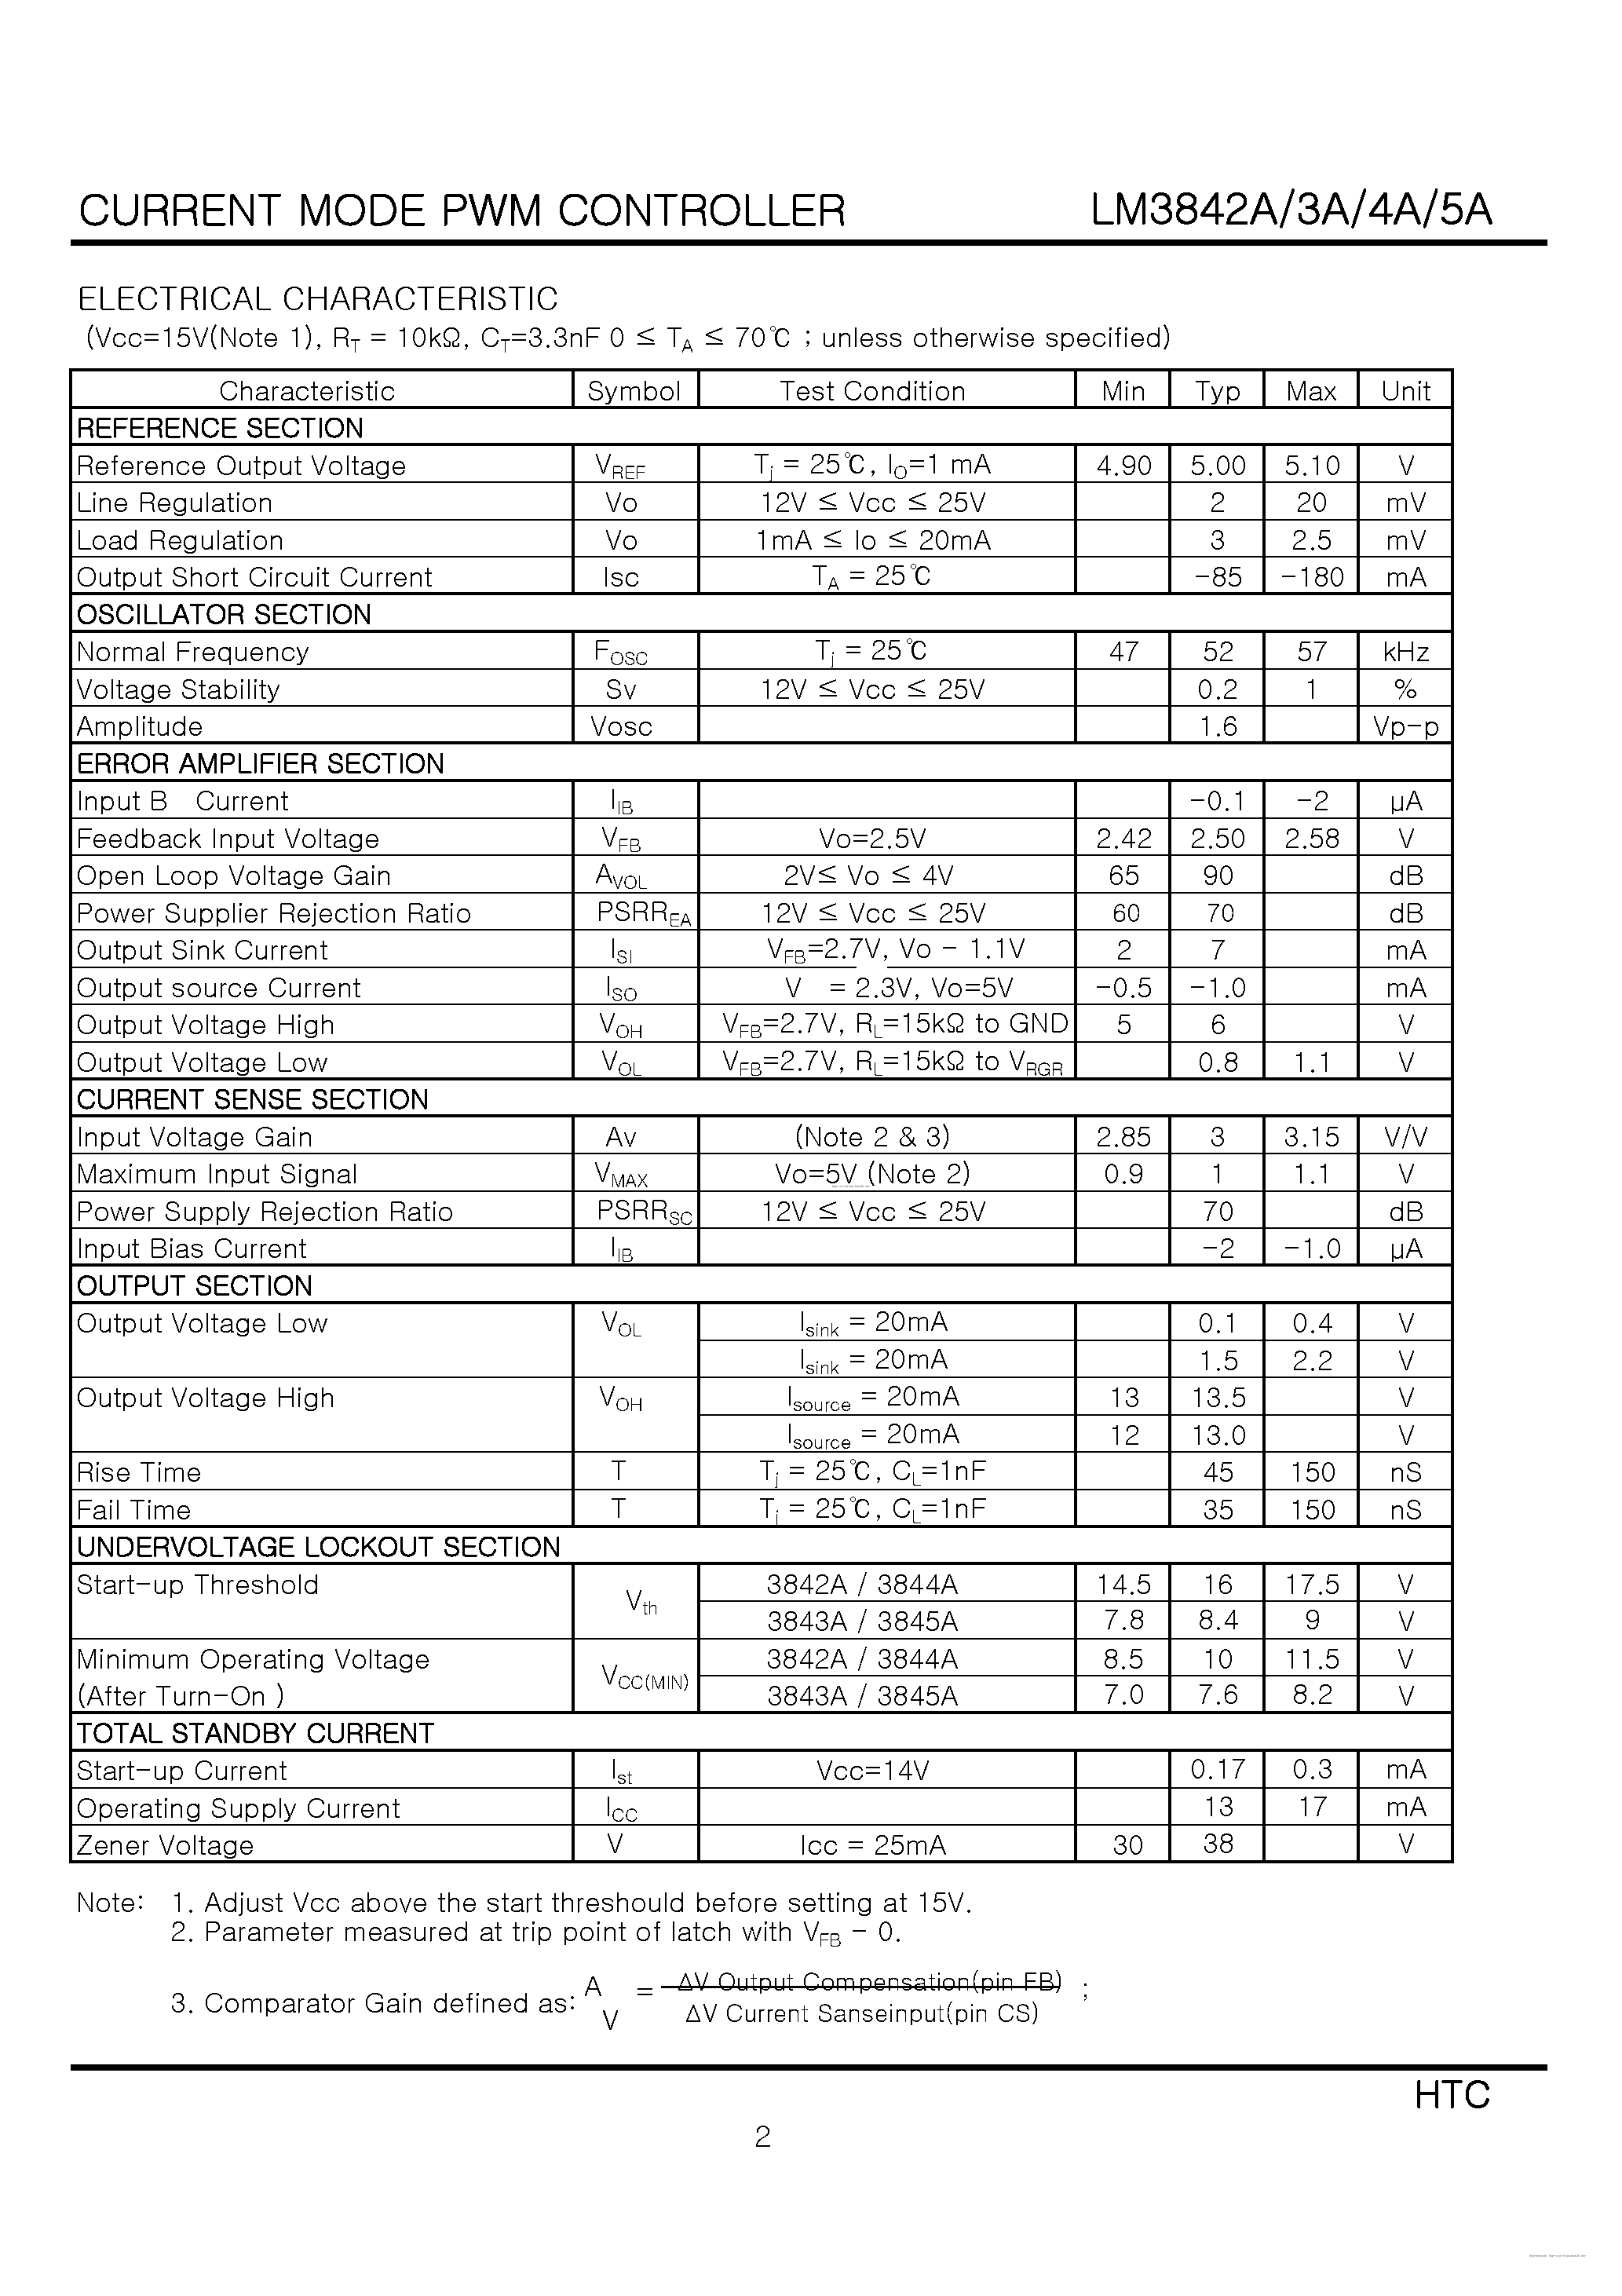 Datasheet LM3842A - page 2